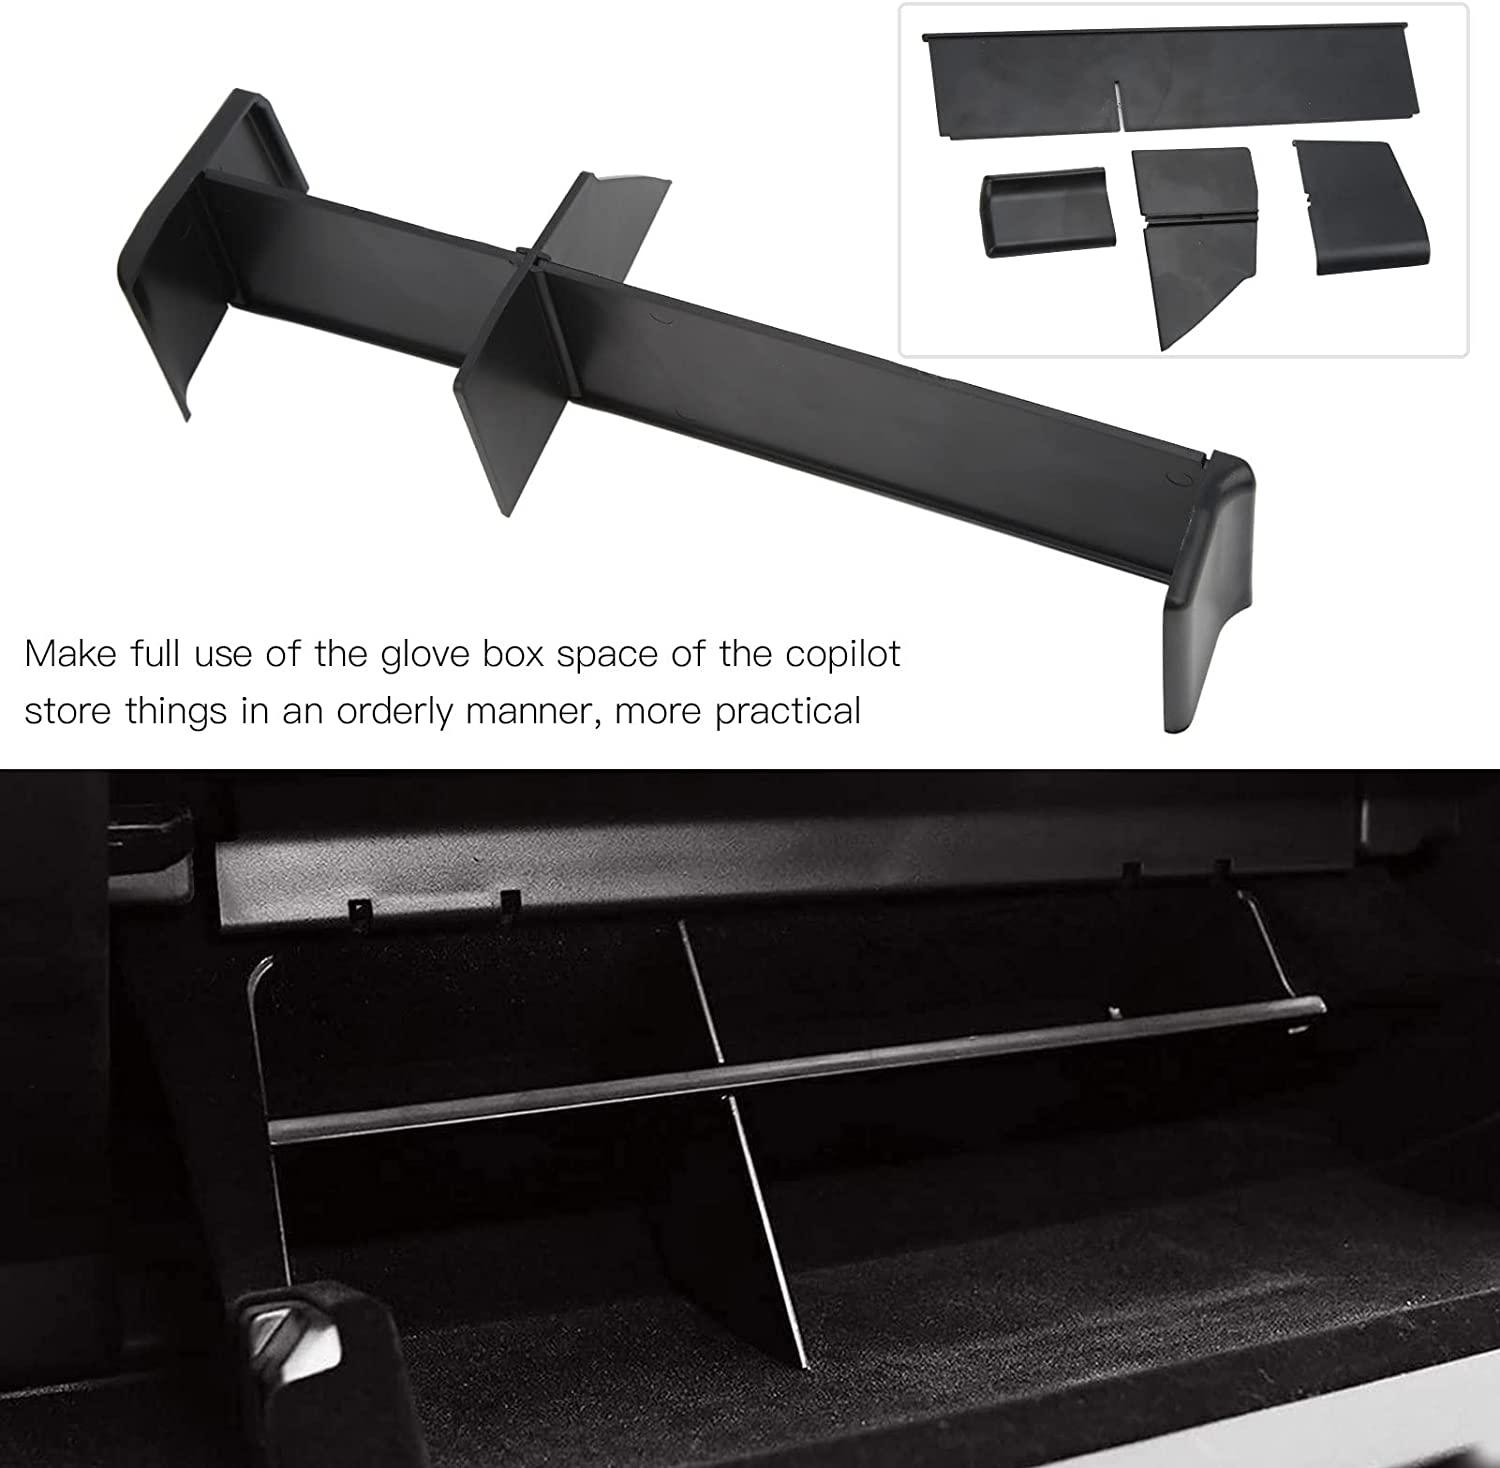 Glove Box Organizer For Model Y - TESLOVERY